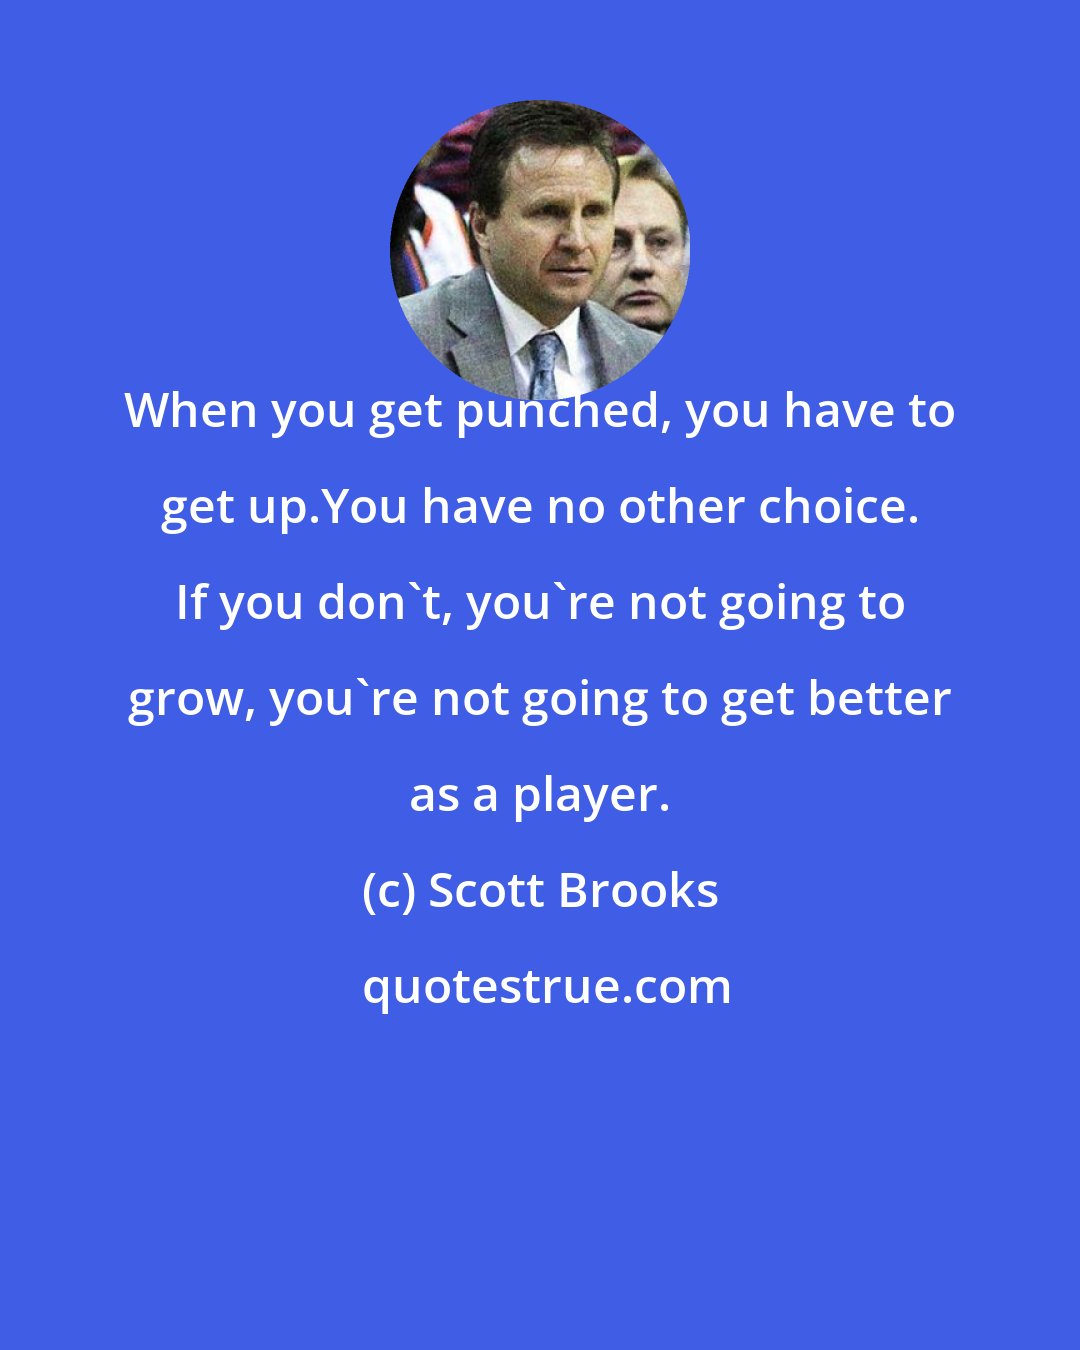 Scott Brooks: When you get punched, you have to get up.You have no other choice. If you don't, you're not going to grow, you're not going to get better as a player.